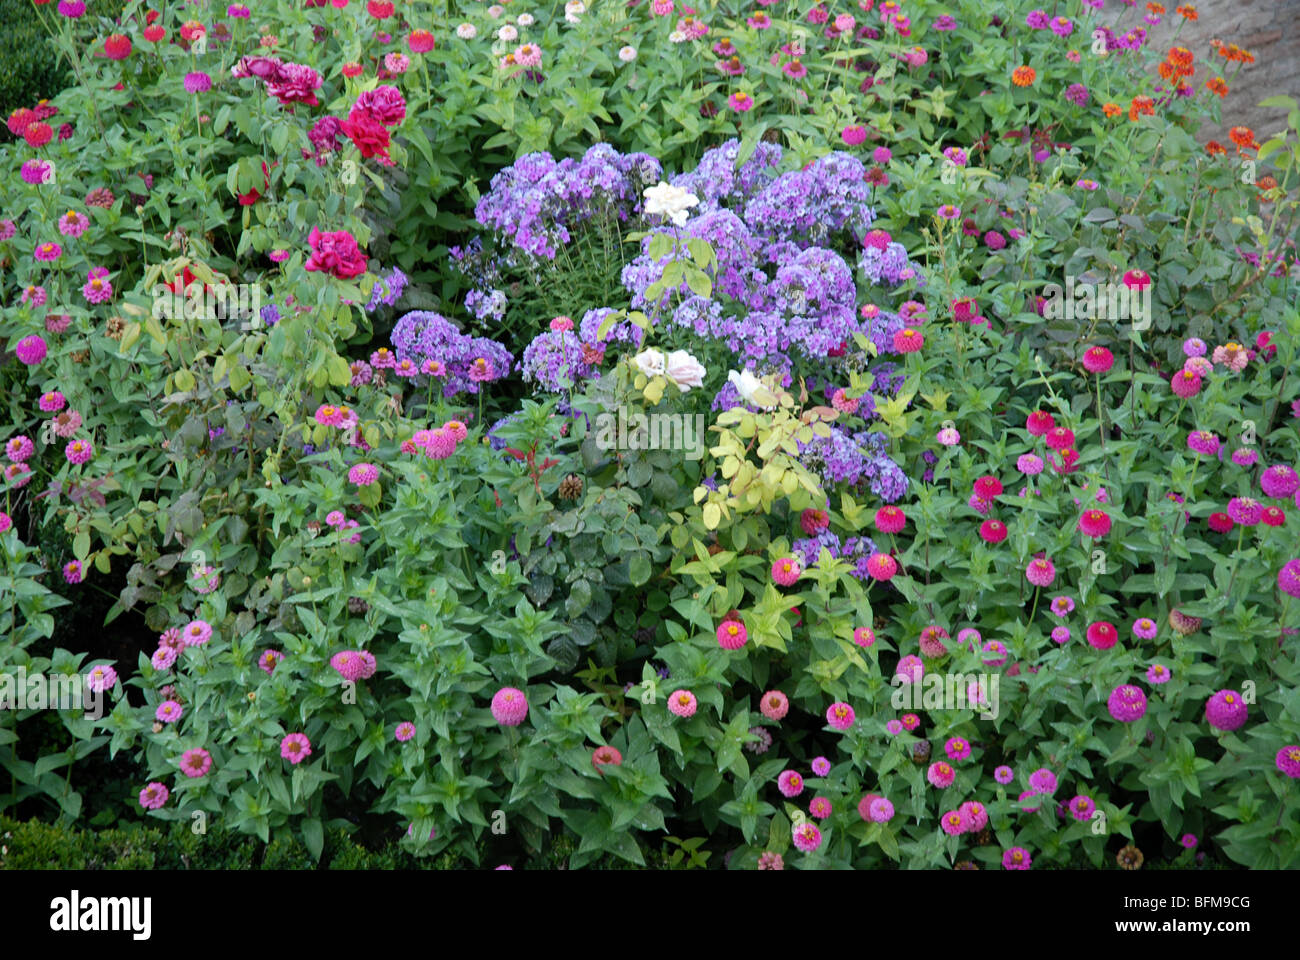 flowerbed, The Alhambra, Granada, Andalusia, Spain Stock Photo